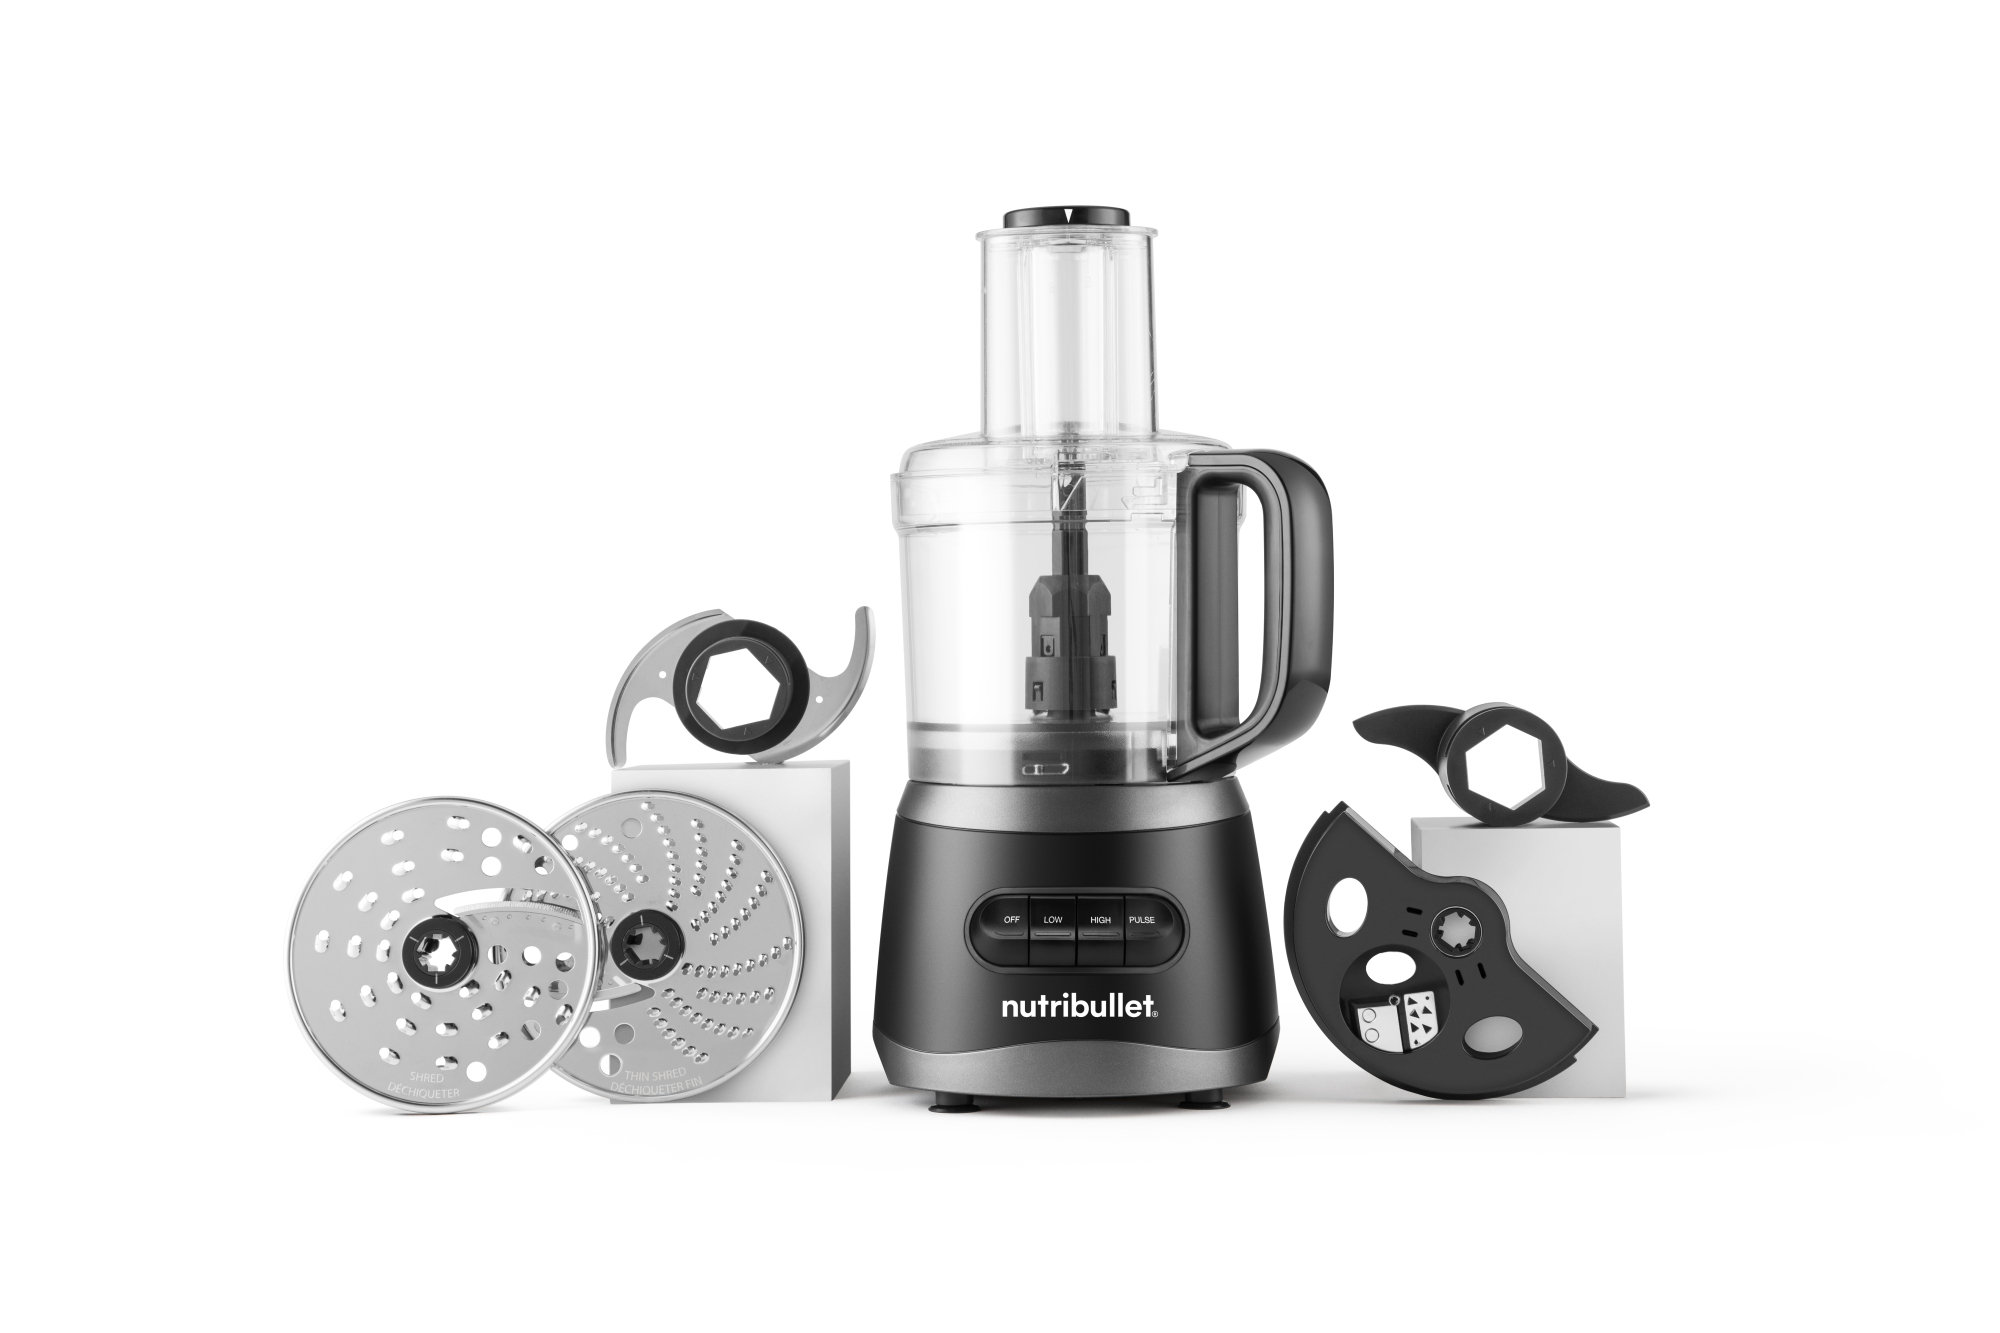 The Nutribullet food processor comes with tons of accessories.